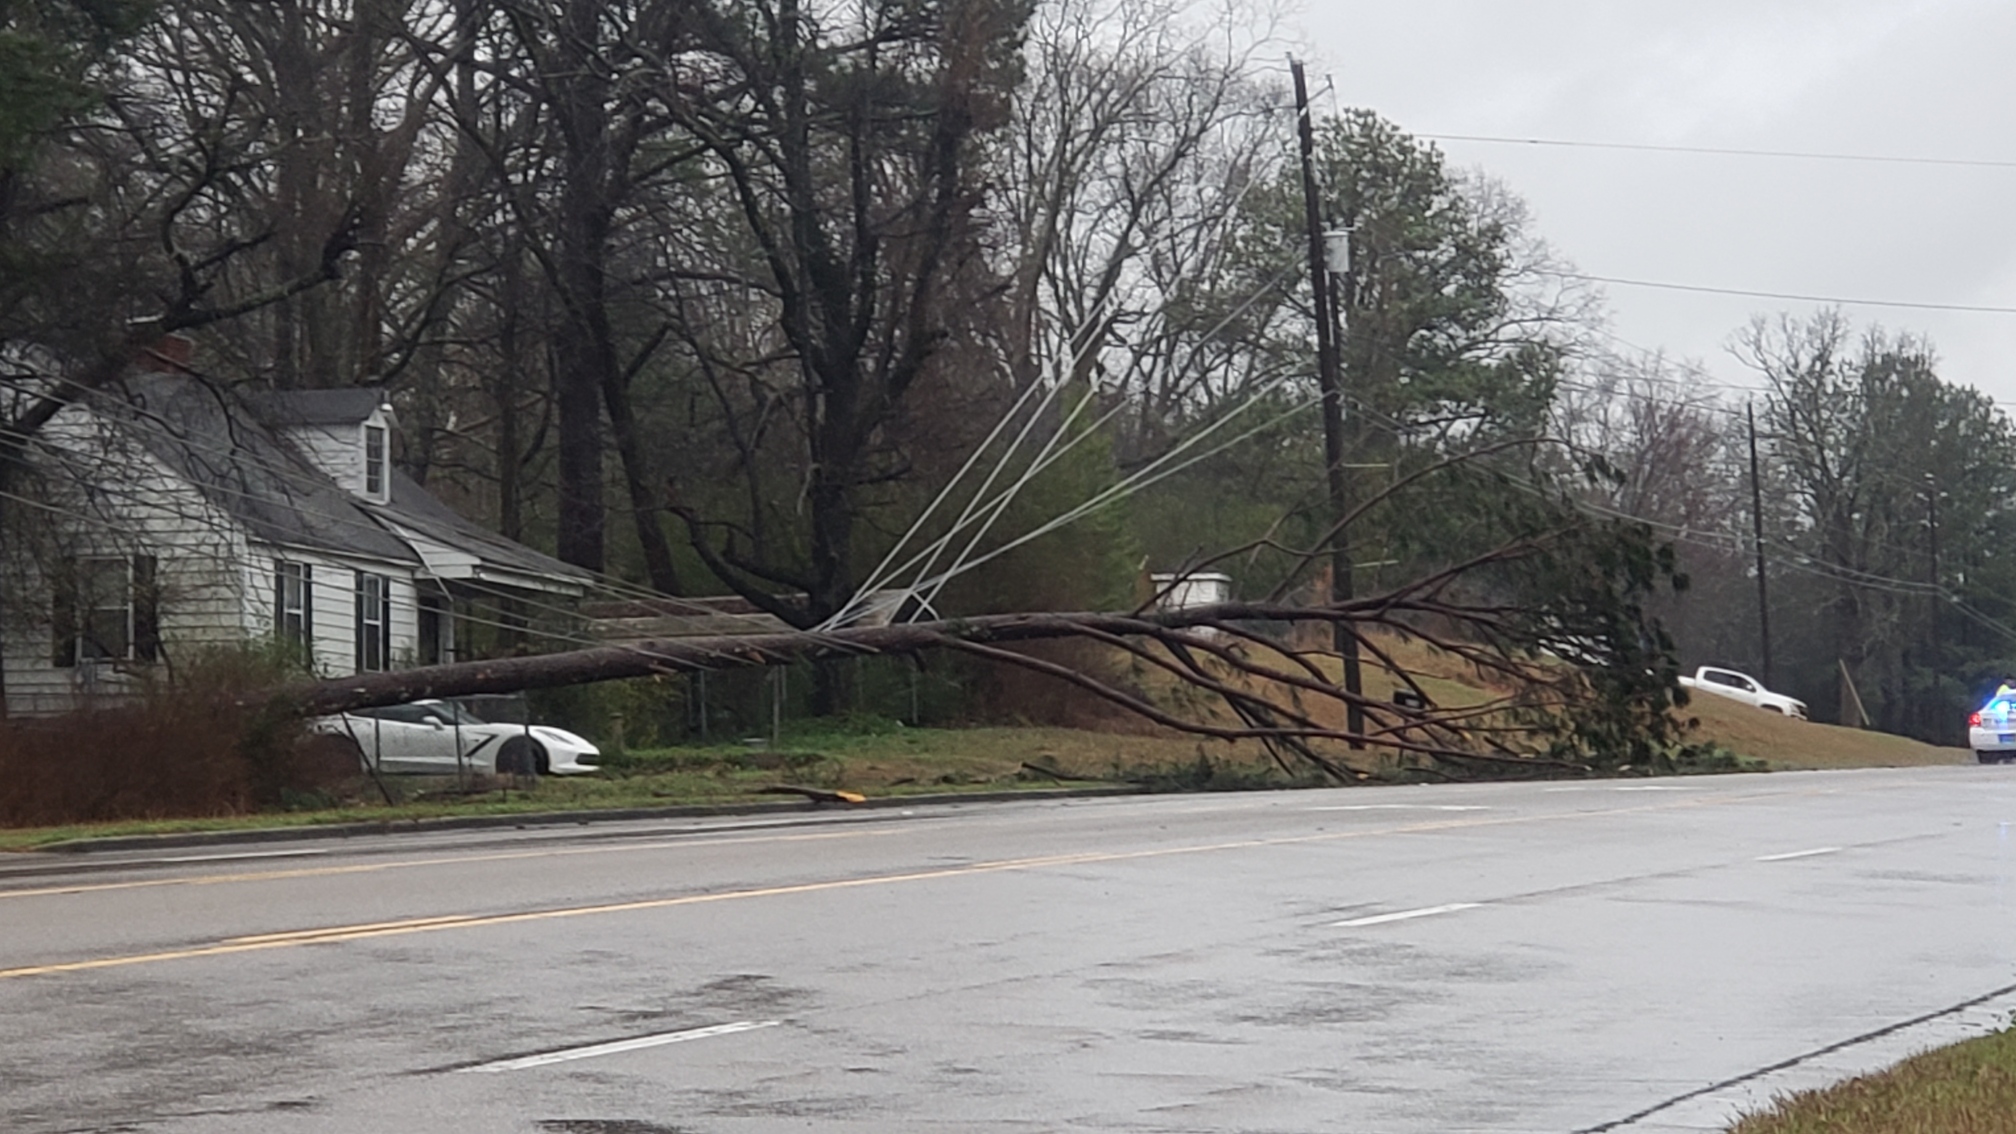 Thousands without power after storms, additional crews responding